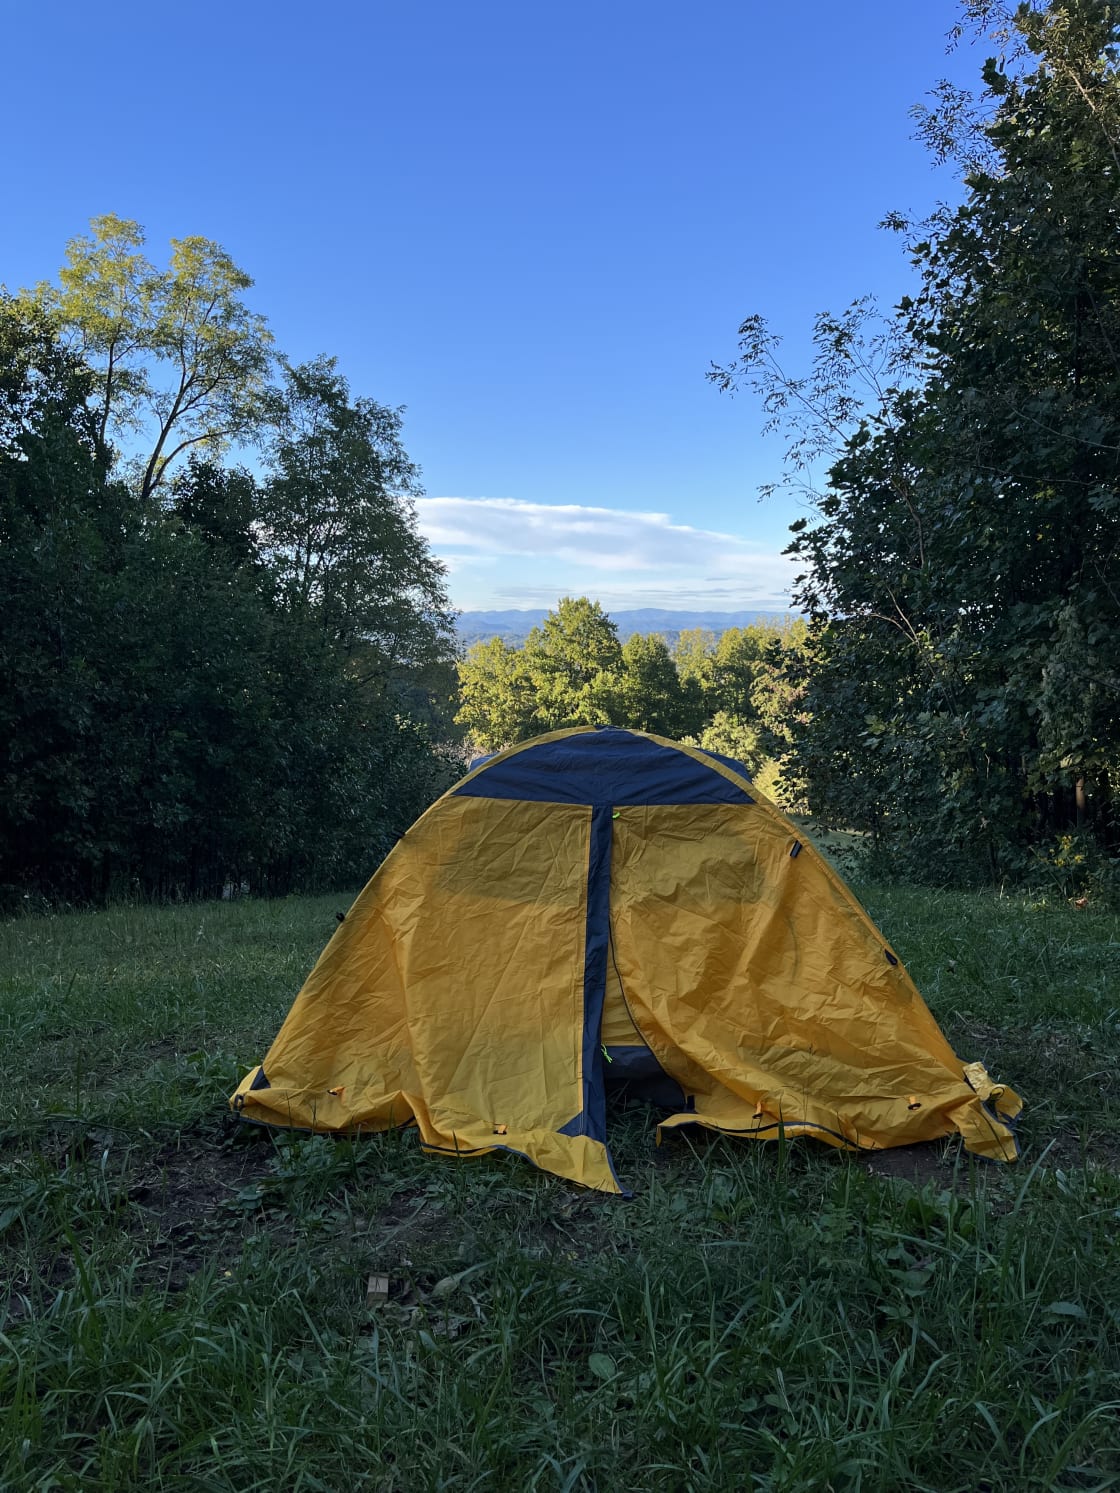 Camp or Glamp at a Mountain Farm